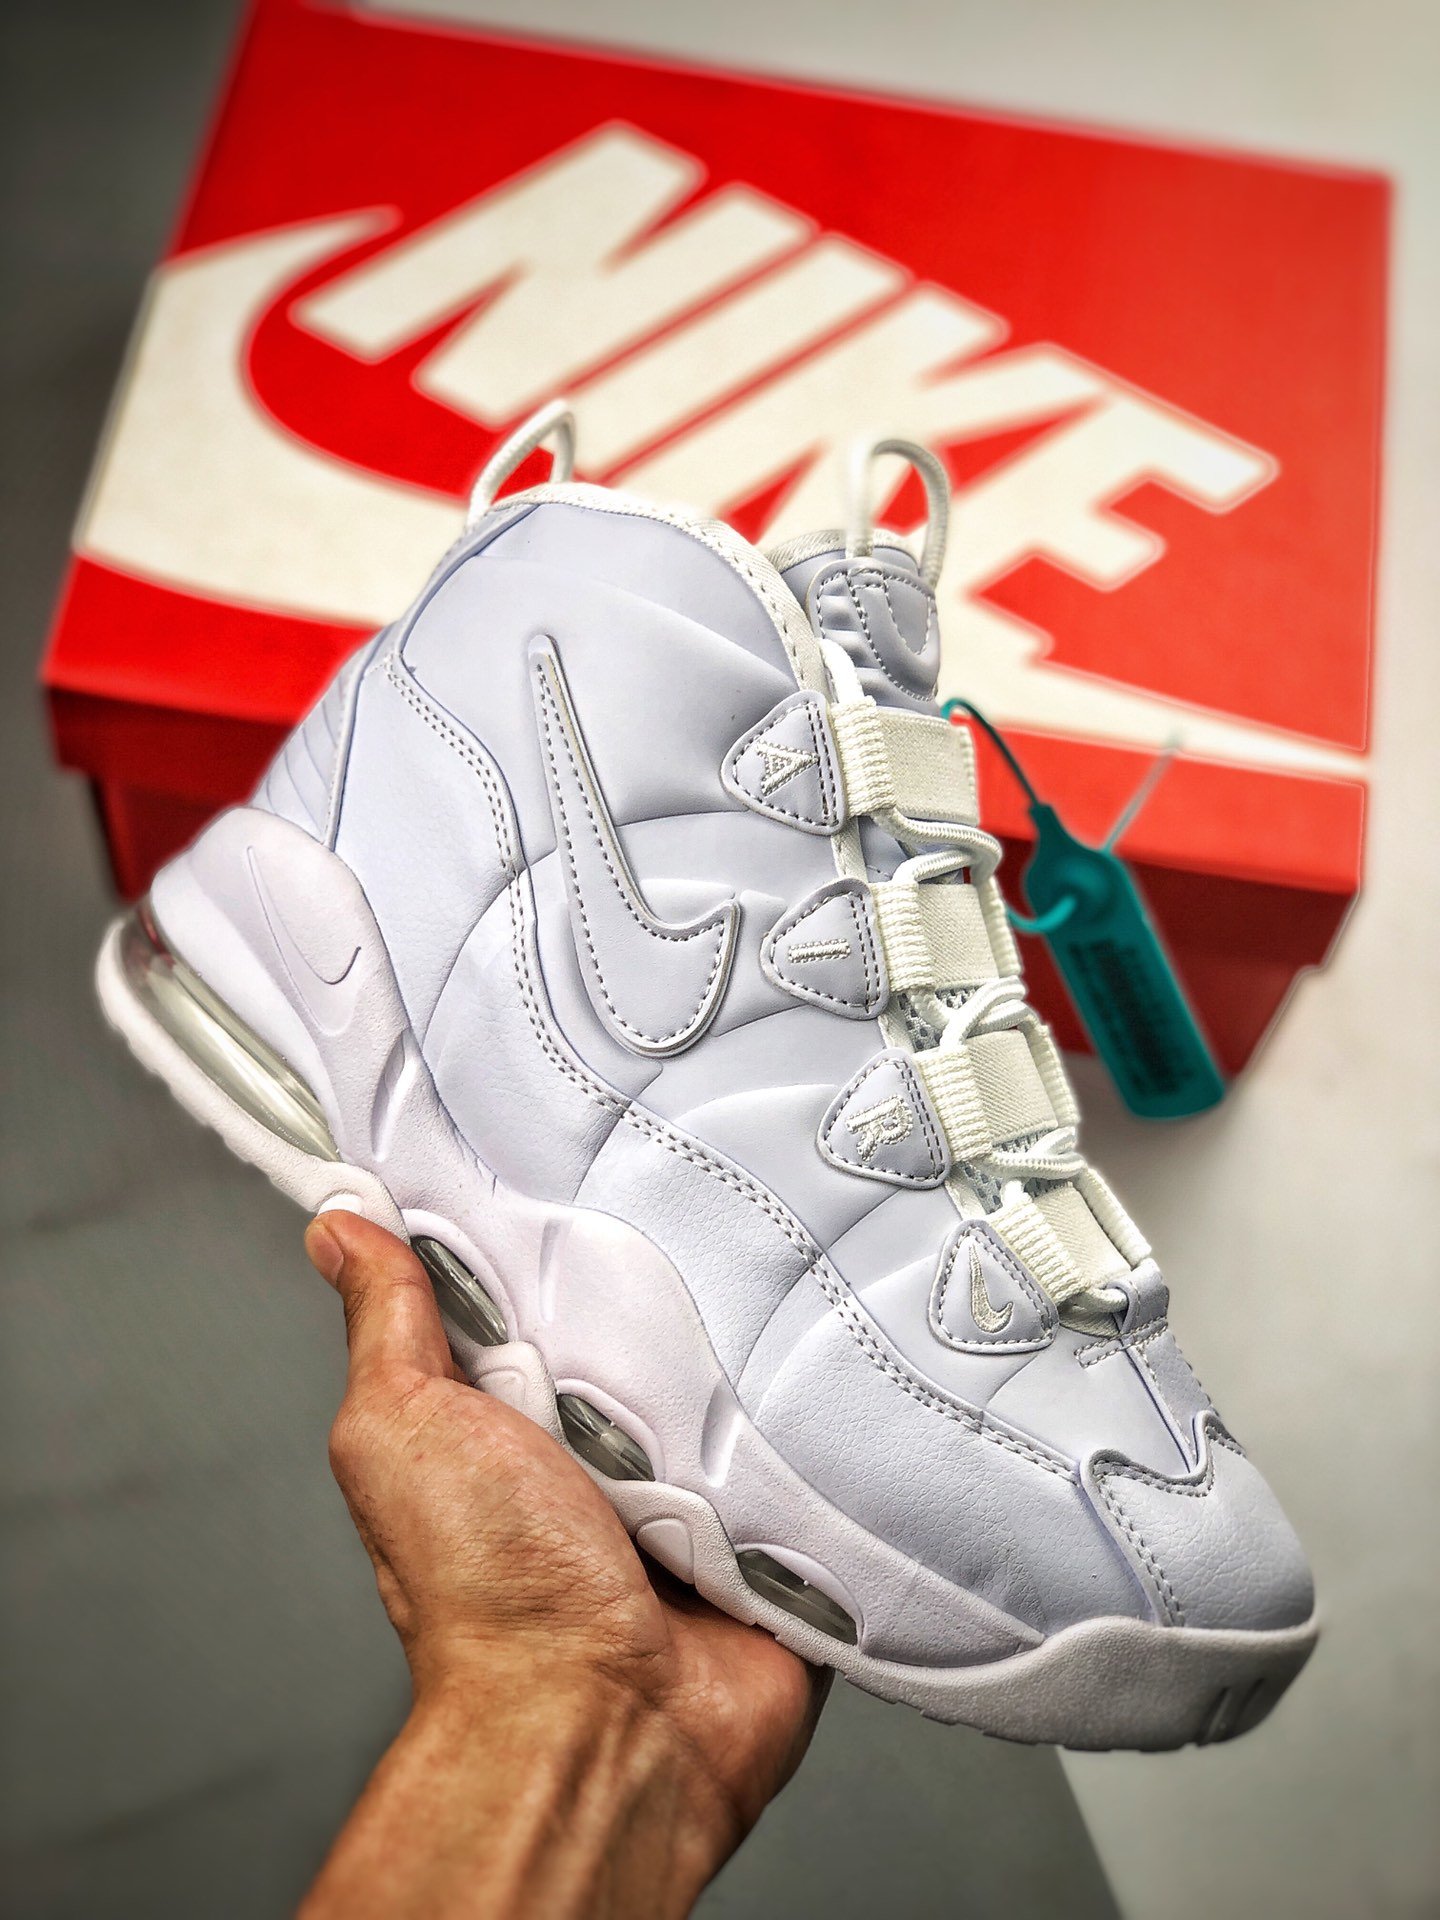 Nike Air Max Uptempo '95 "Triple White" Shoes